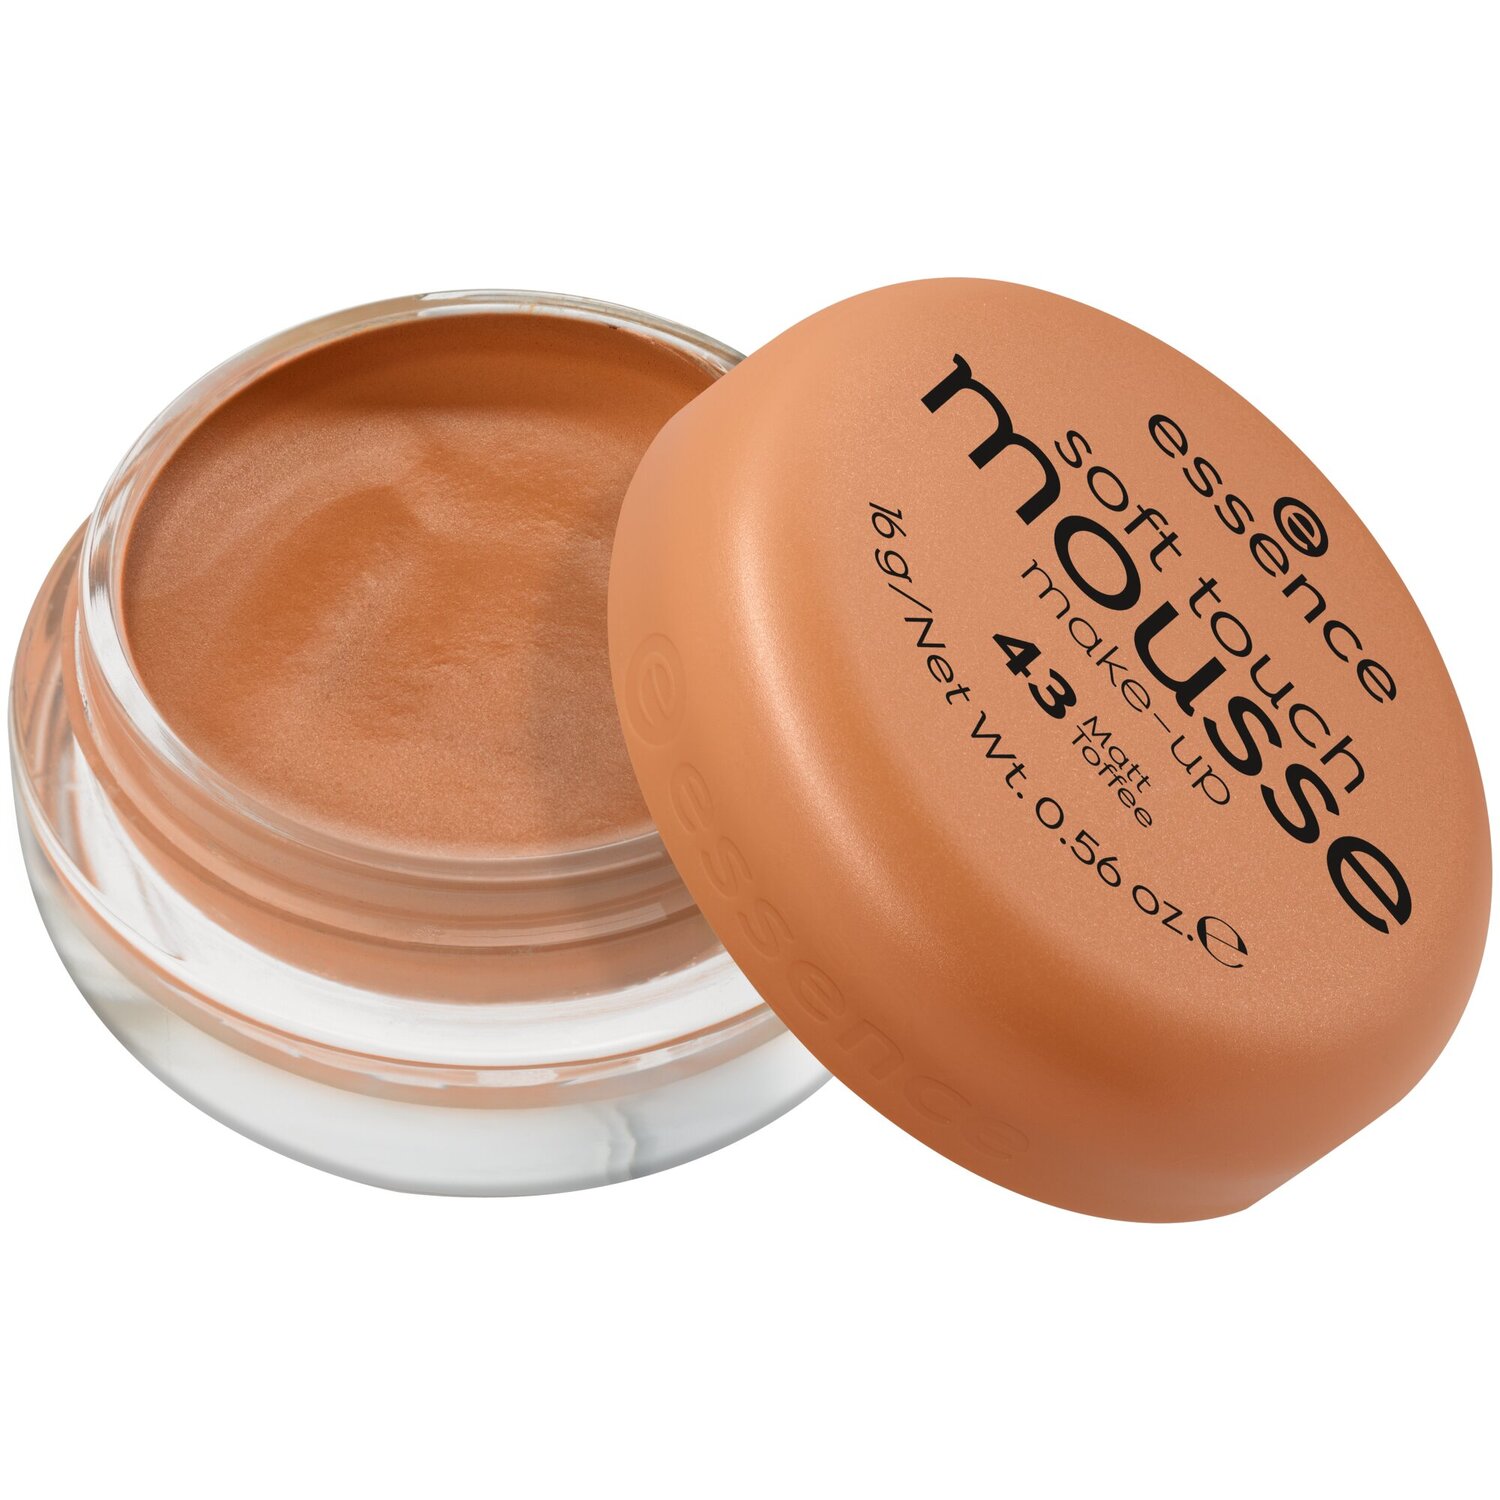 essence Soft Touch Mousse Make-Up - 43 - Matt Toffee Image 2